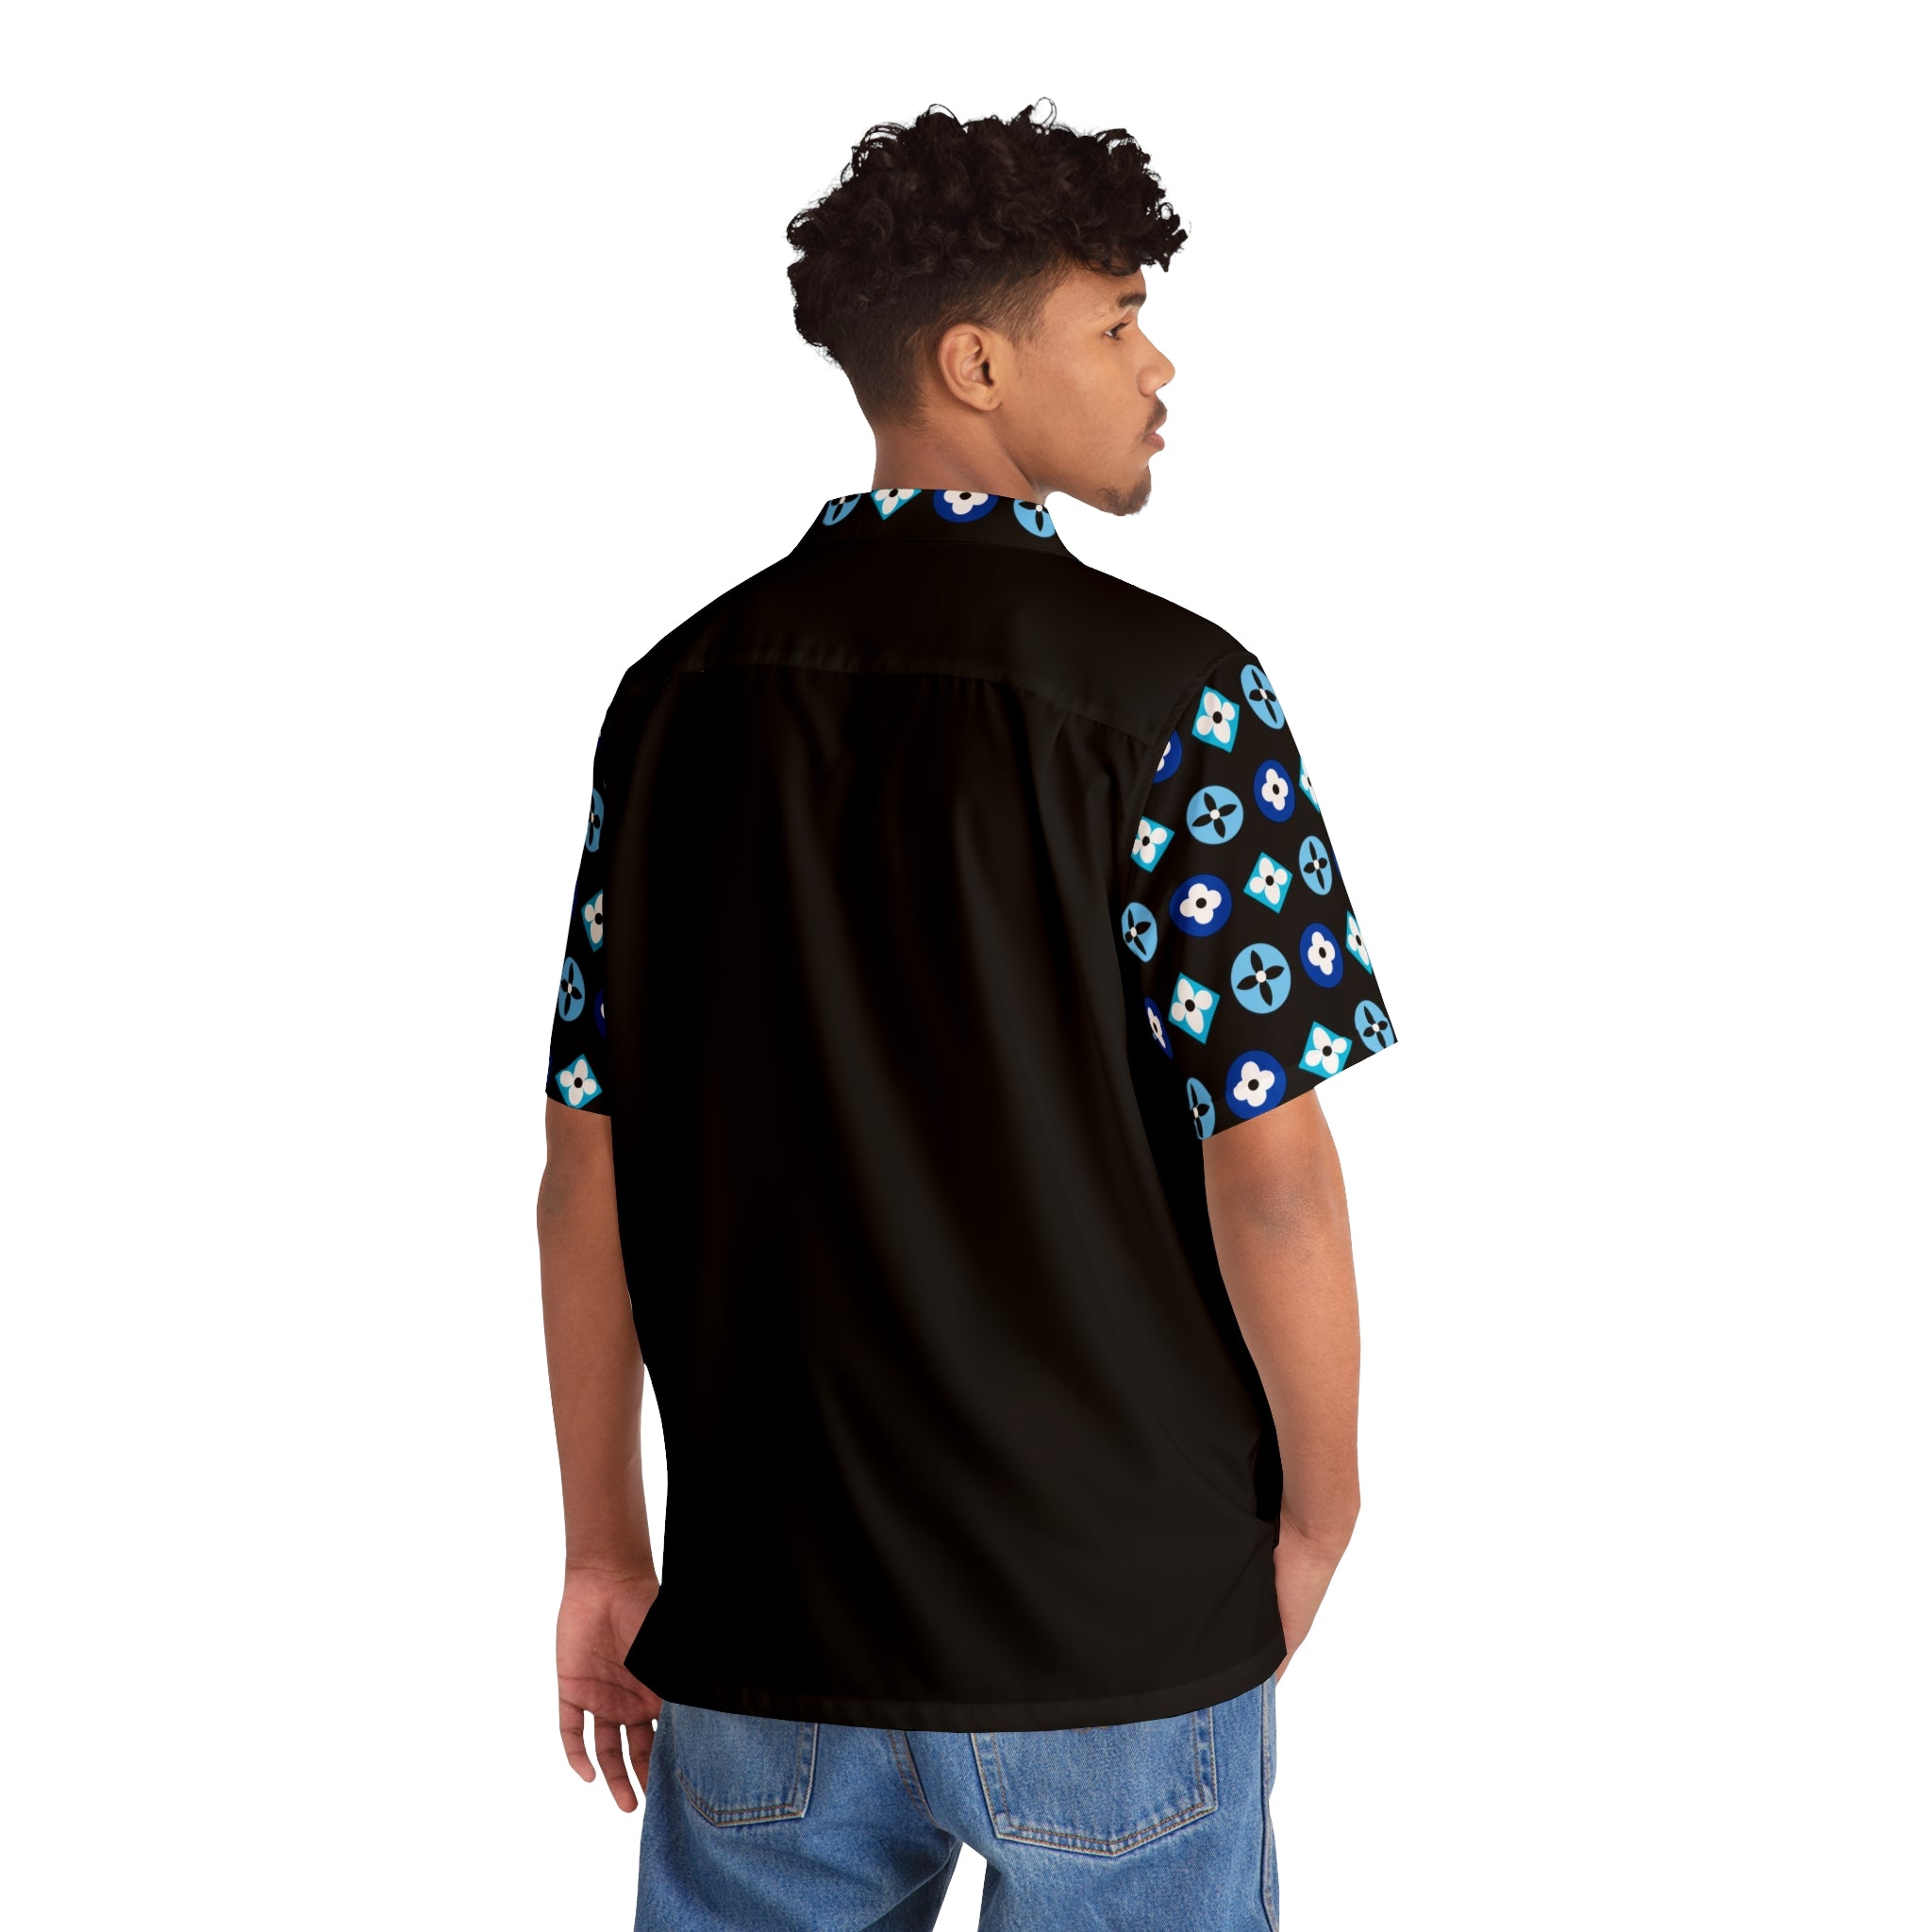  Groove Collection Trilogy of Icons Solid Block (Blues) Unisex Gender Neutral Black Button Up Shirt, Hawaiian Shirt Men's Shirts